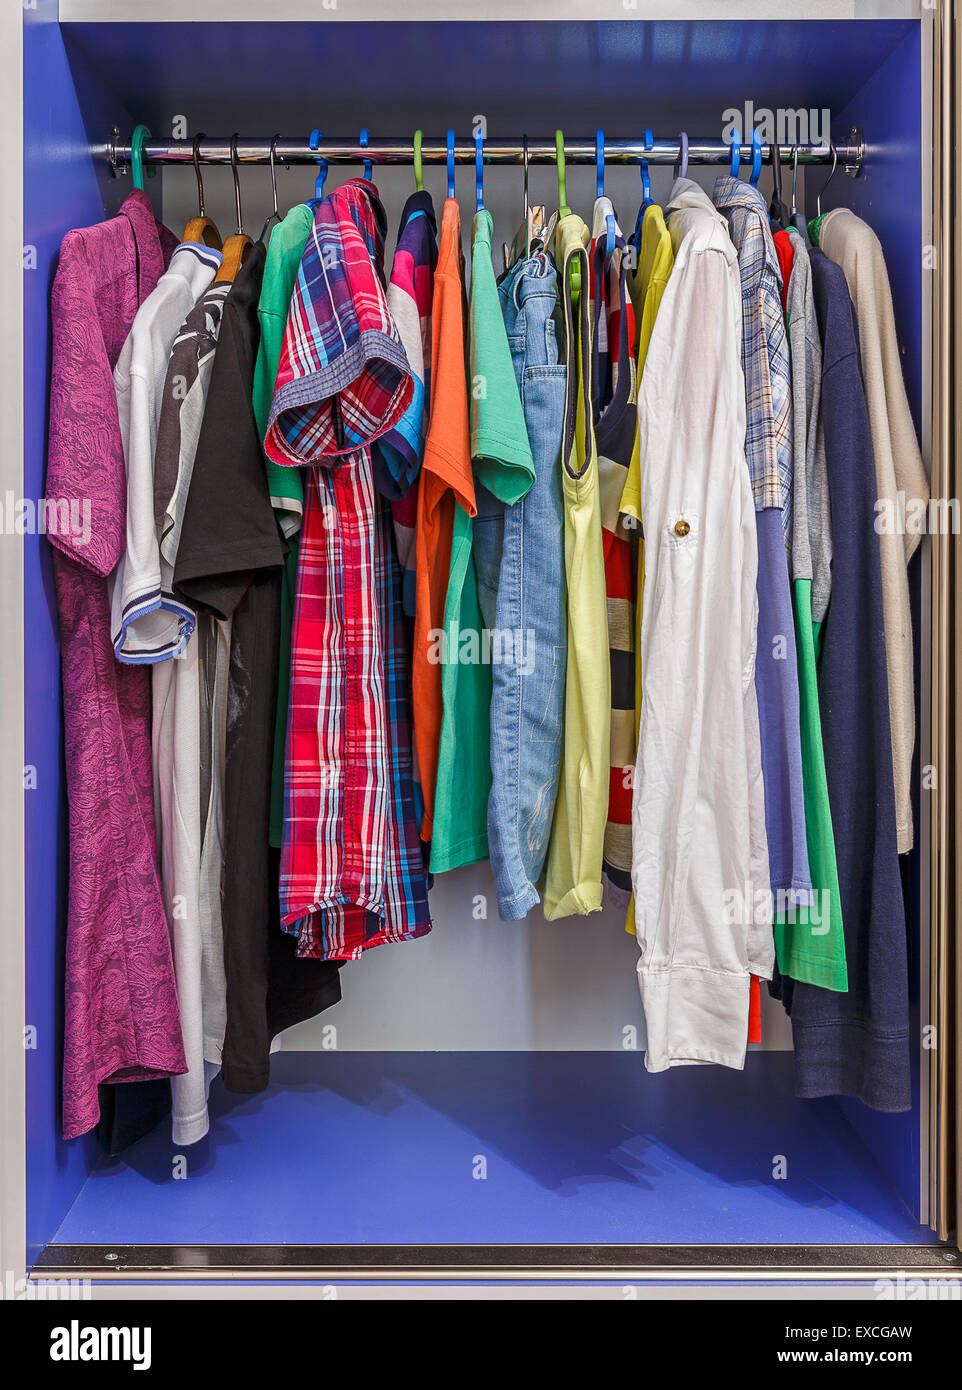 https://c8.alamy.com/comp/EXCGAW/wardrobe-with-hanging-clothes-on-hangers-EXCGAW.jpg